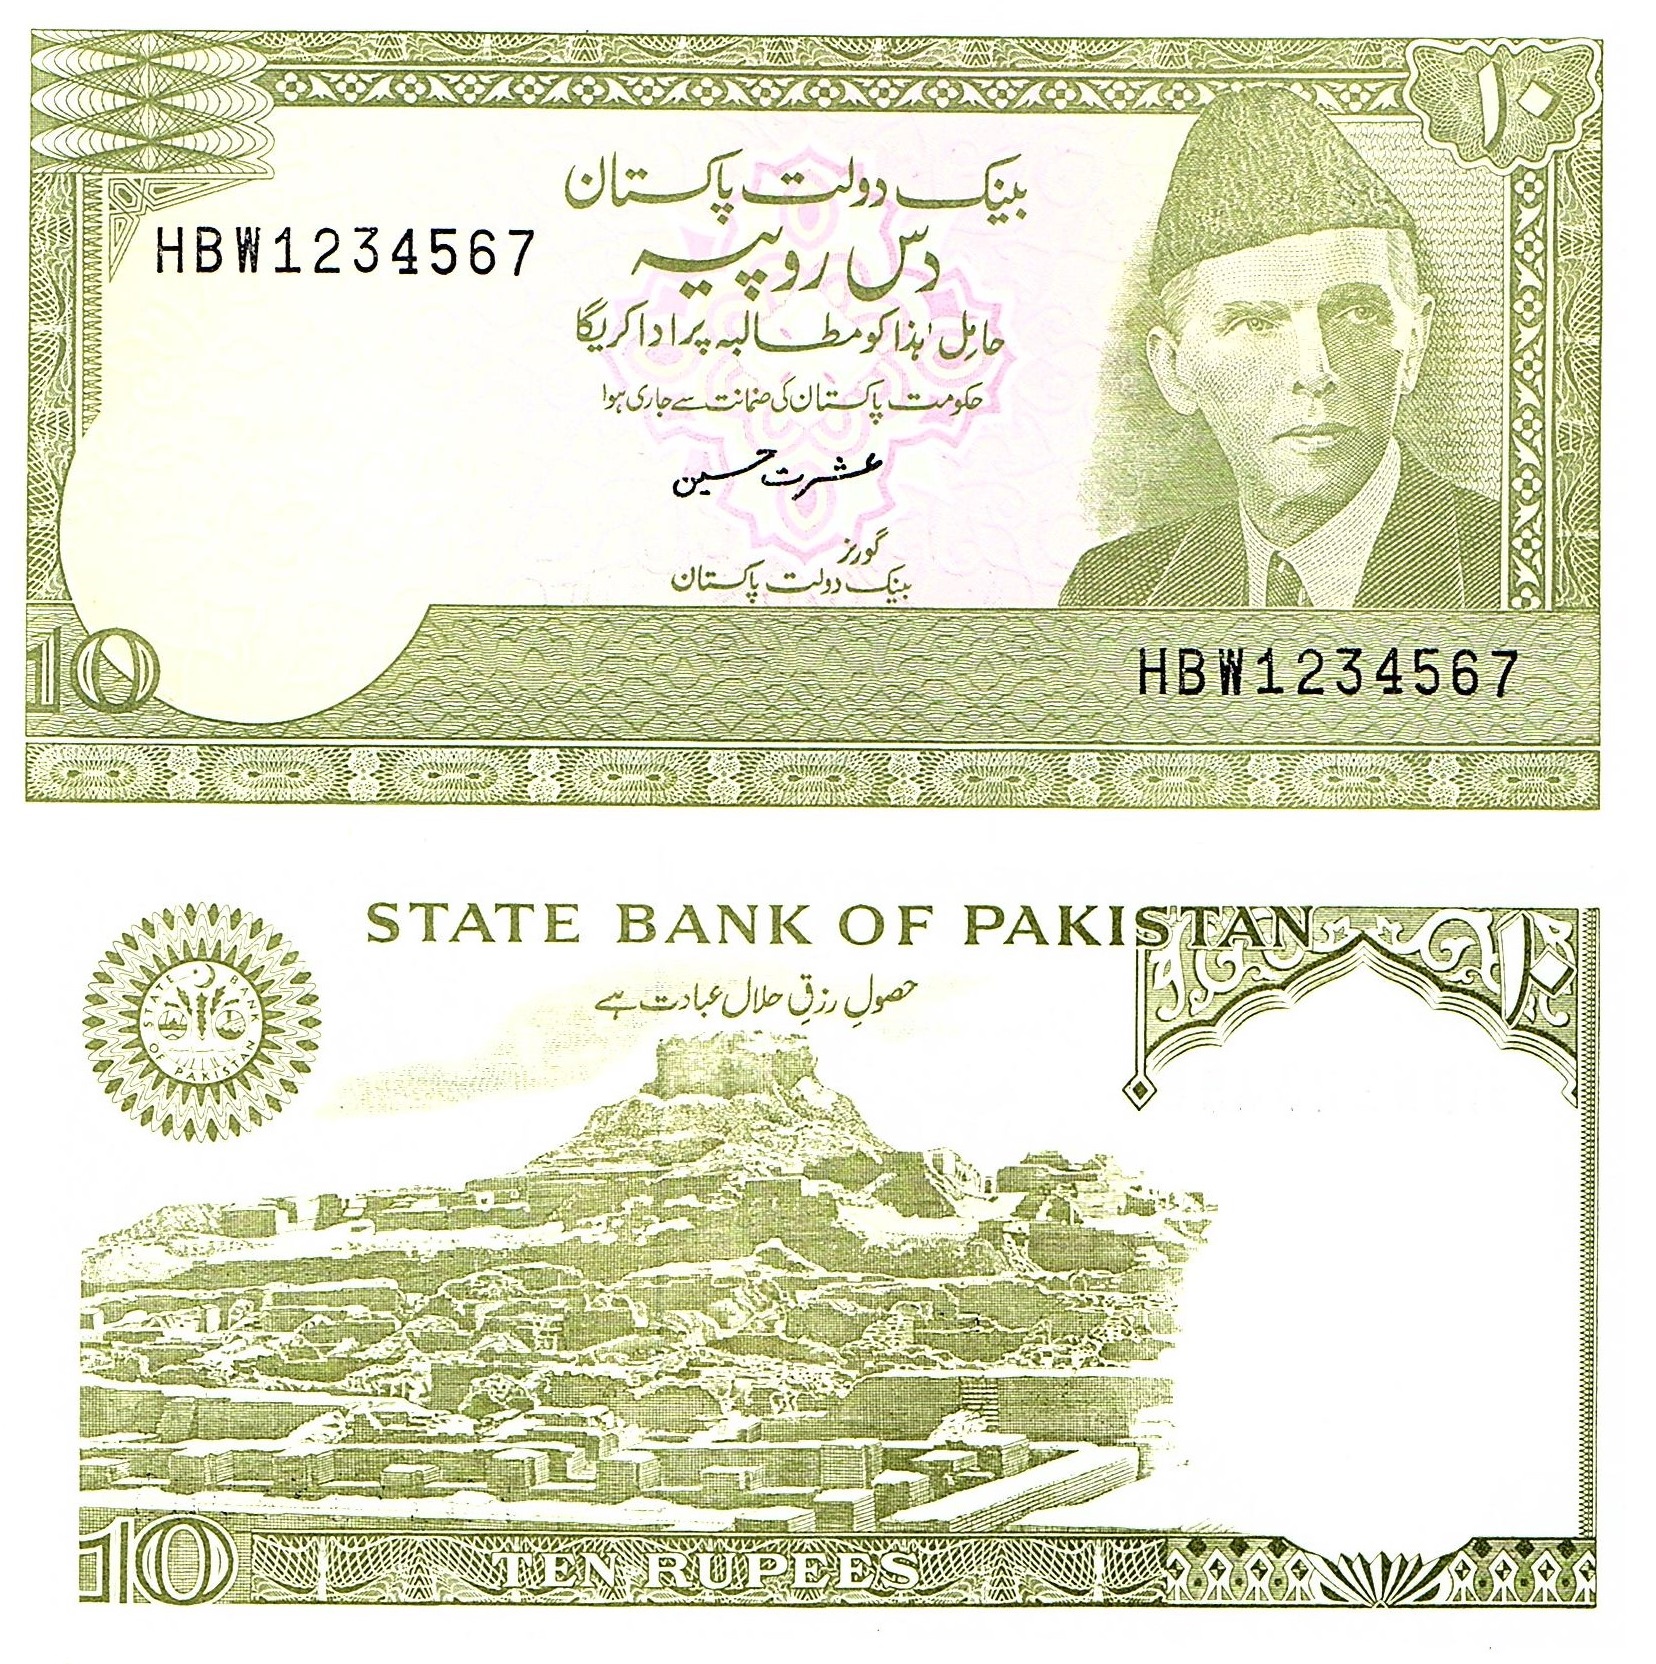 Pakistan #39(6)   10 Rupees LADDER NOTE